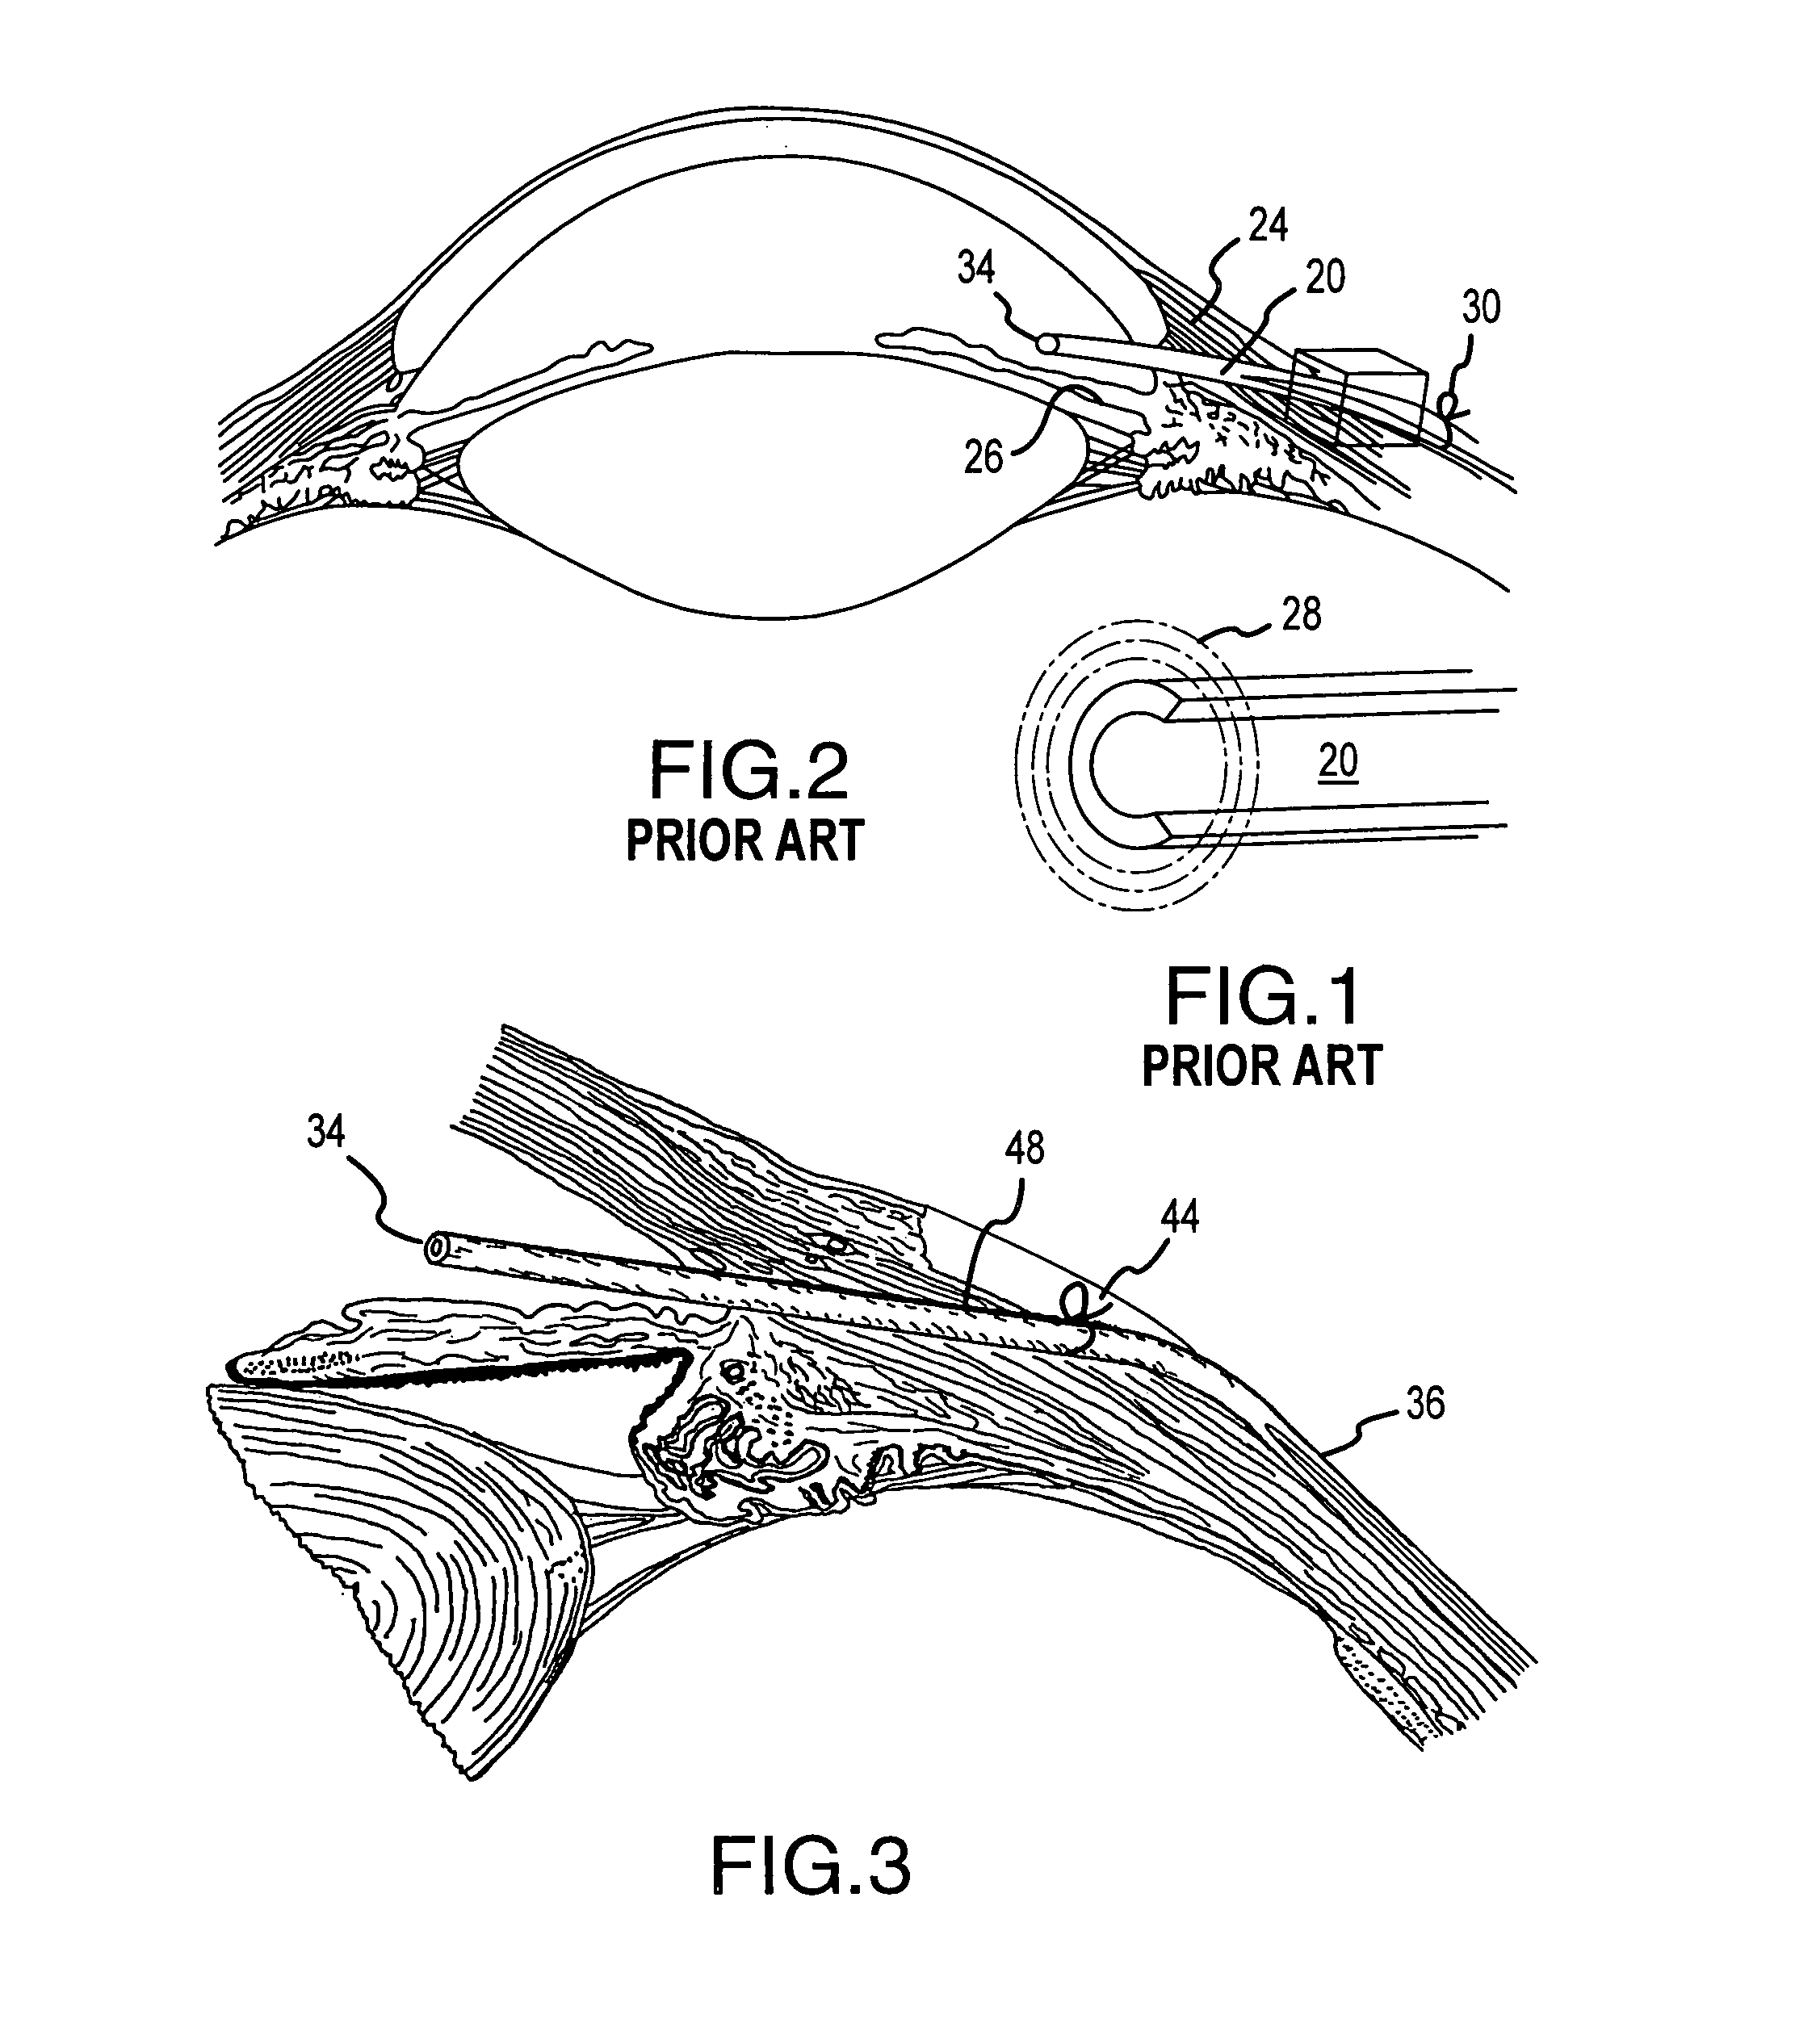 C-shaped cross section tubular ophthalmic implant for reduction of intraocular pressure in glaucomatous eyes and method of use